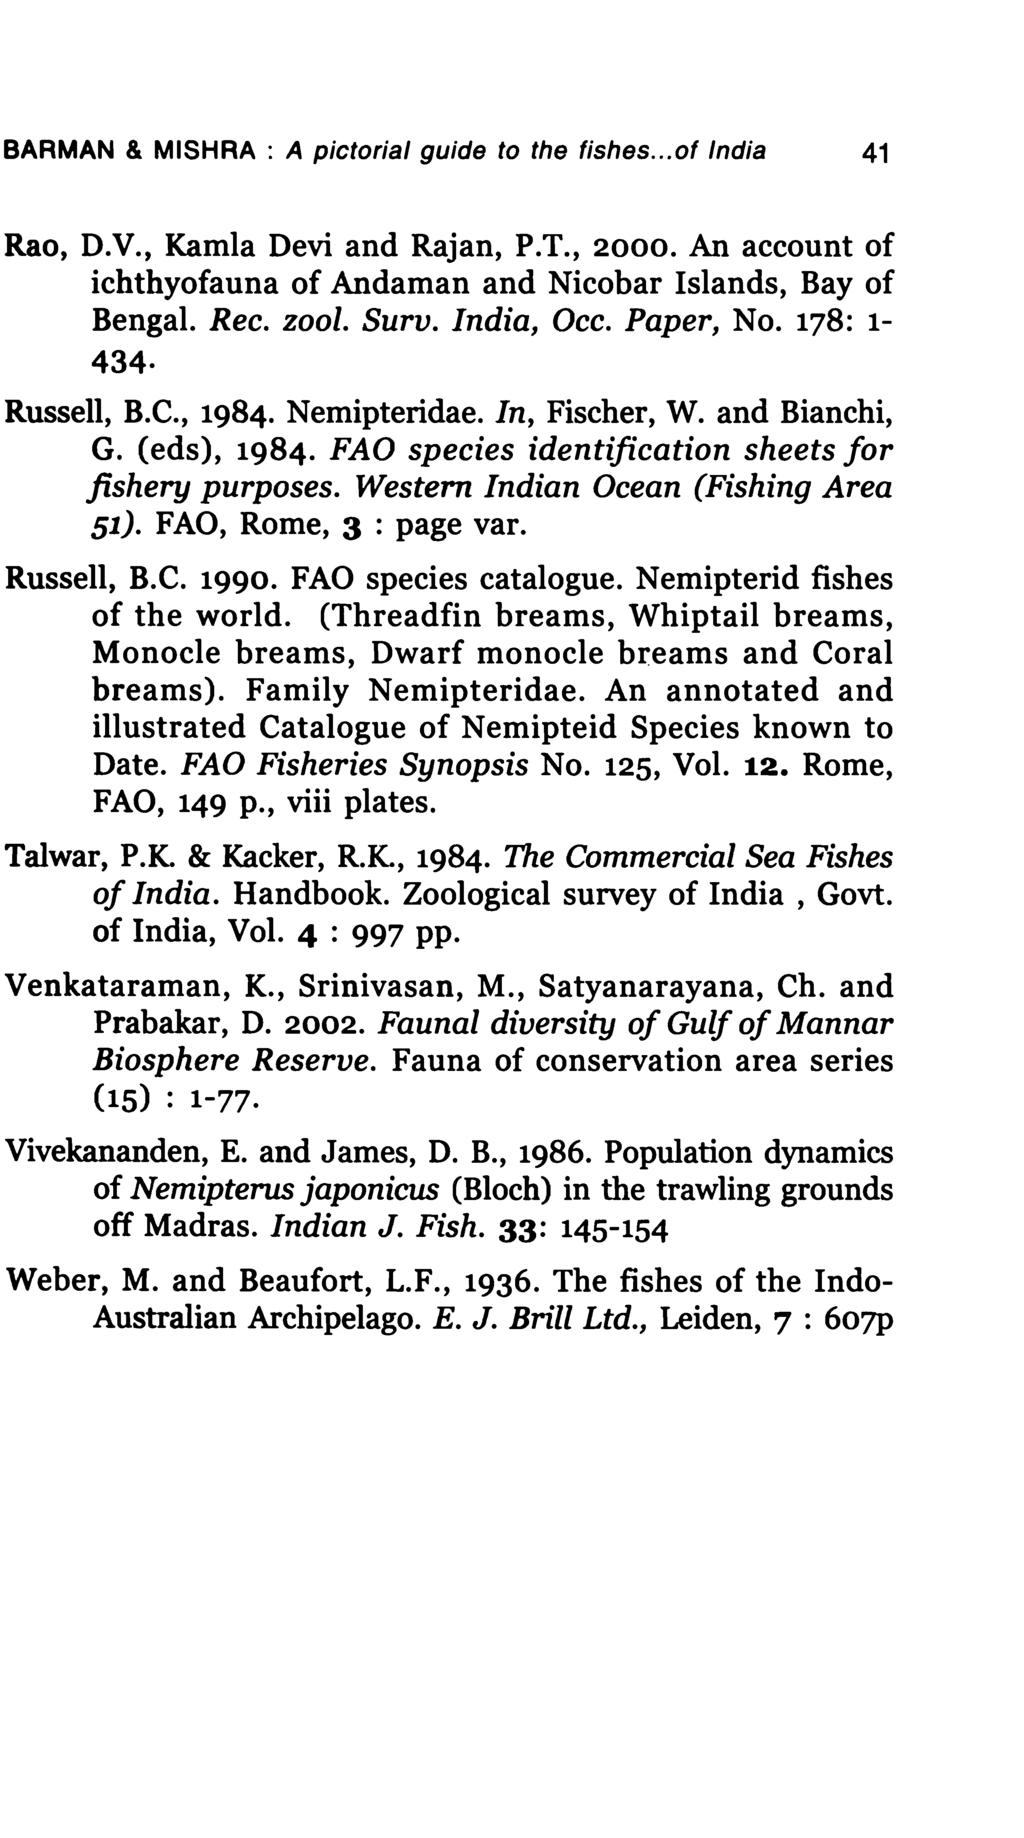 BARMAN & MISHRA : A pictorial guide to the fishes... of India 41 Rao, D.V., Kamla Devi and Rajan, P.T., 2000. An account of ichthyofauna of Andaman and Nicobar Islands, Bay of Bengal. Rec. zool. Surv.